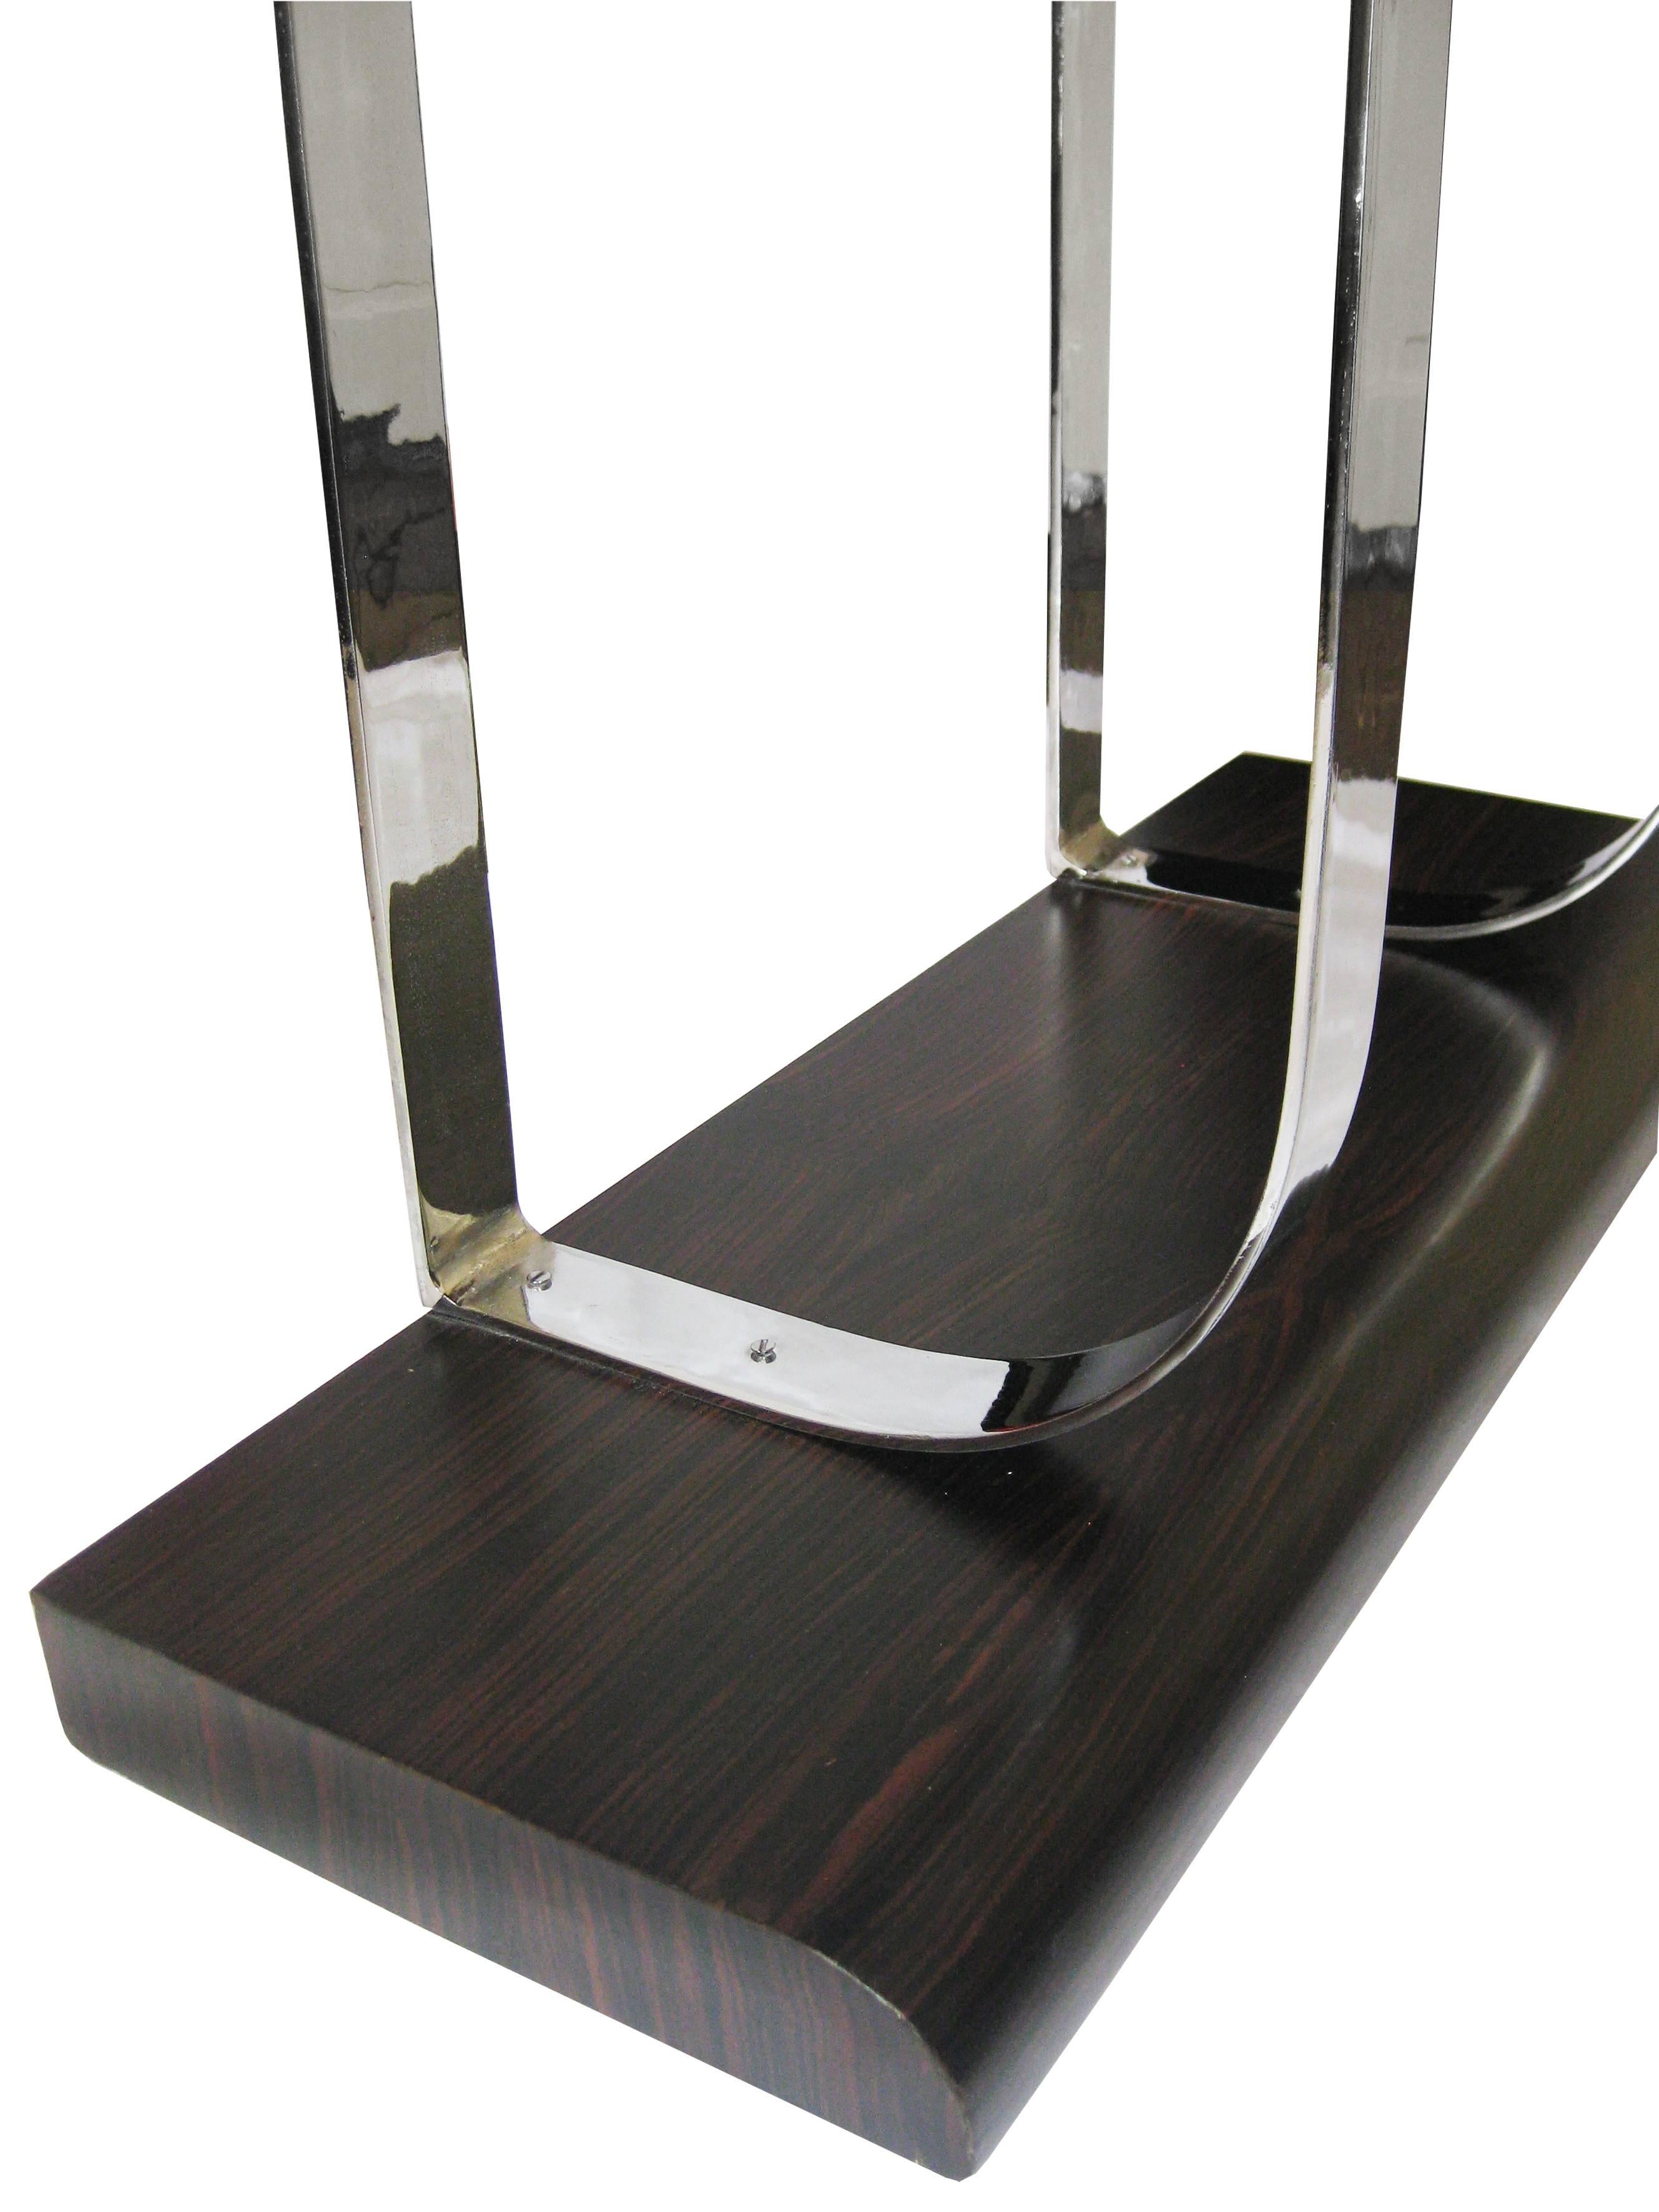 Console veneered in ebony with a chrome base, circa 1930.  Simple, clean lines create an elegant piece.